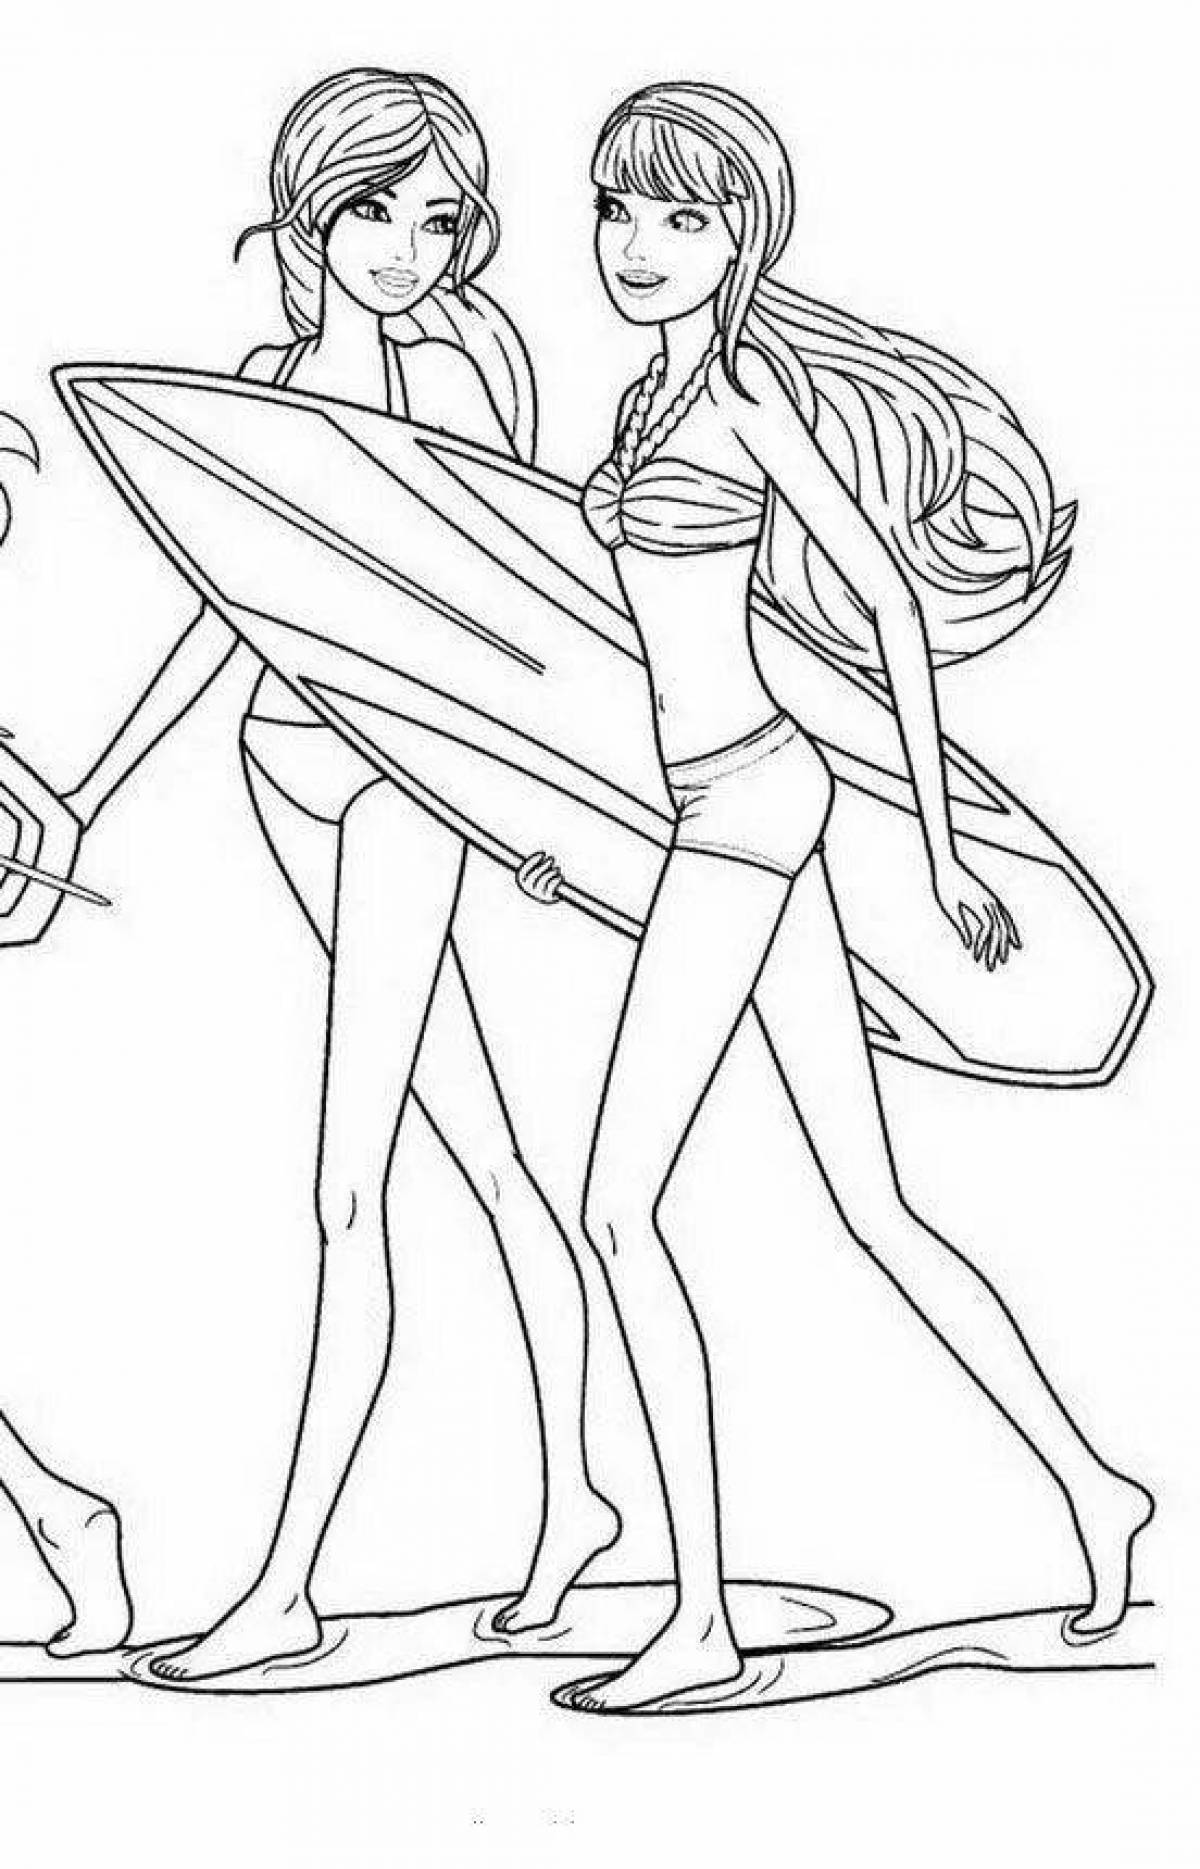 Coloring page wild barbie in a bathing suit